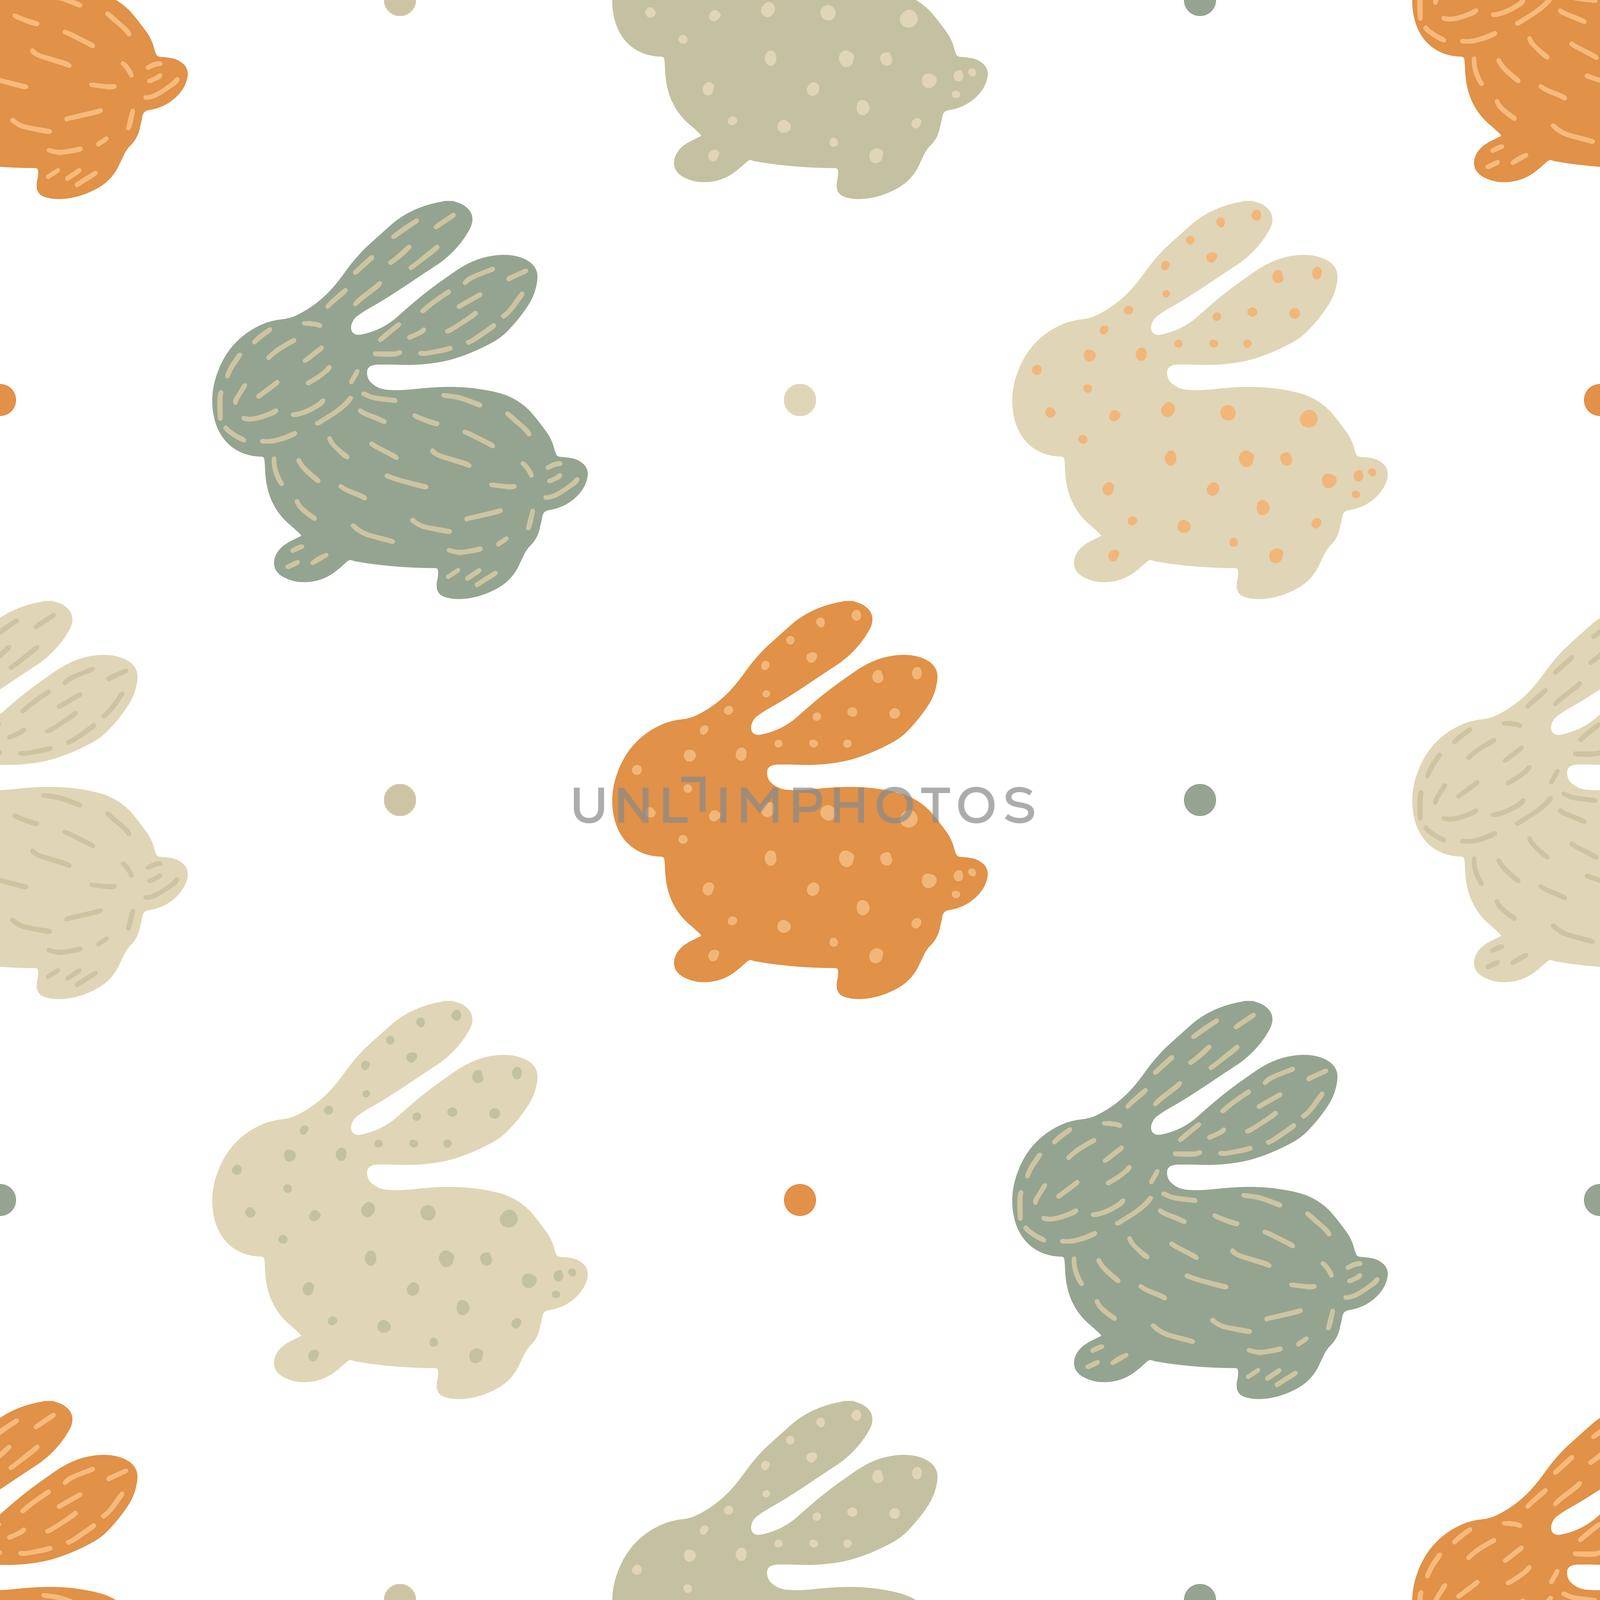 Childish vector seamless pattern with handmade rabbits in Scandinavian style on a white background. For children clothes, fabrics, textiles, baby decorations, wrapping paper.